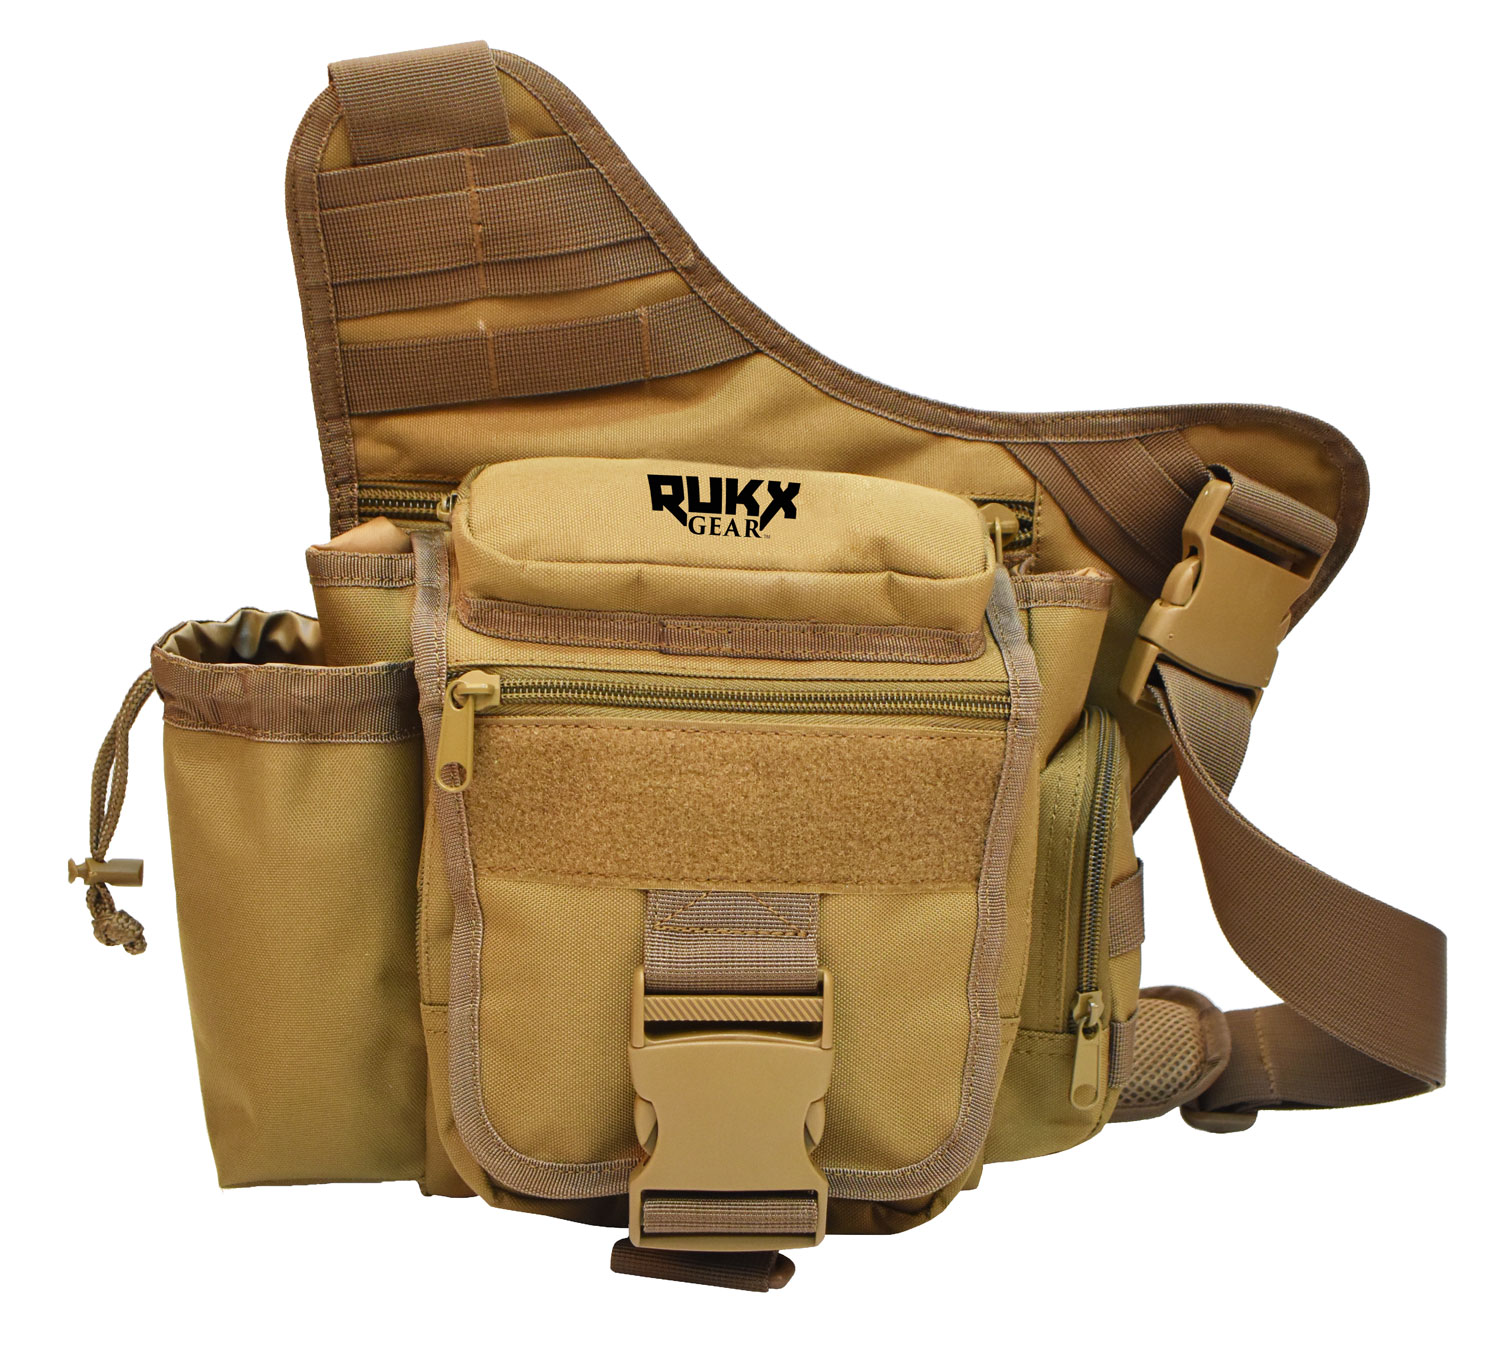 Rukx Gear ATICTSBT Sling Bag  Water Resistant Tan 600D Polyester with Single Strap, Adjustable Water Bottle Holder & Padded Compartments 11.50